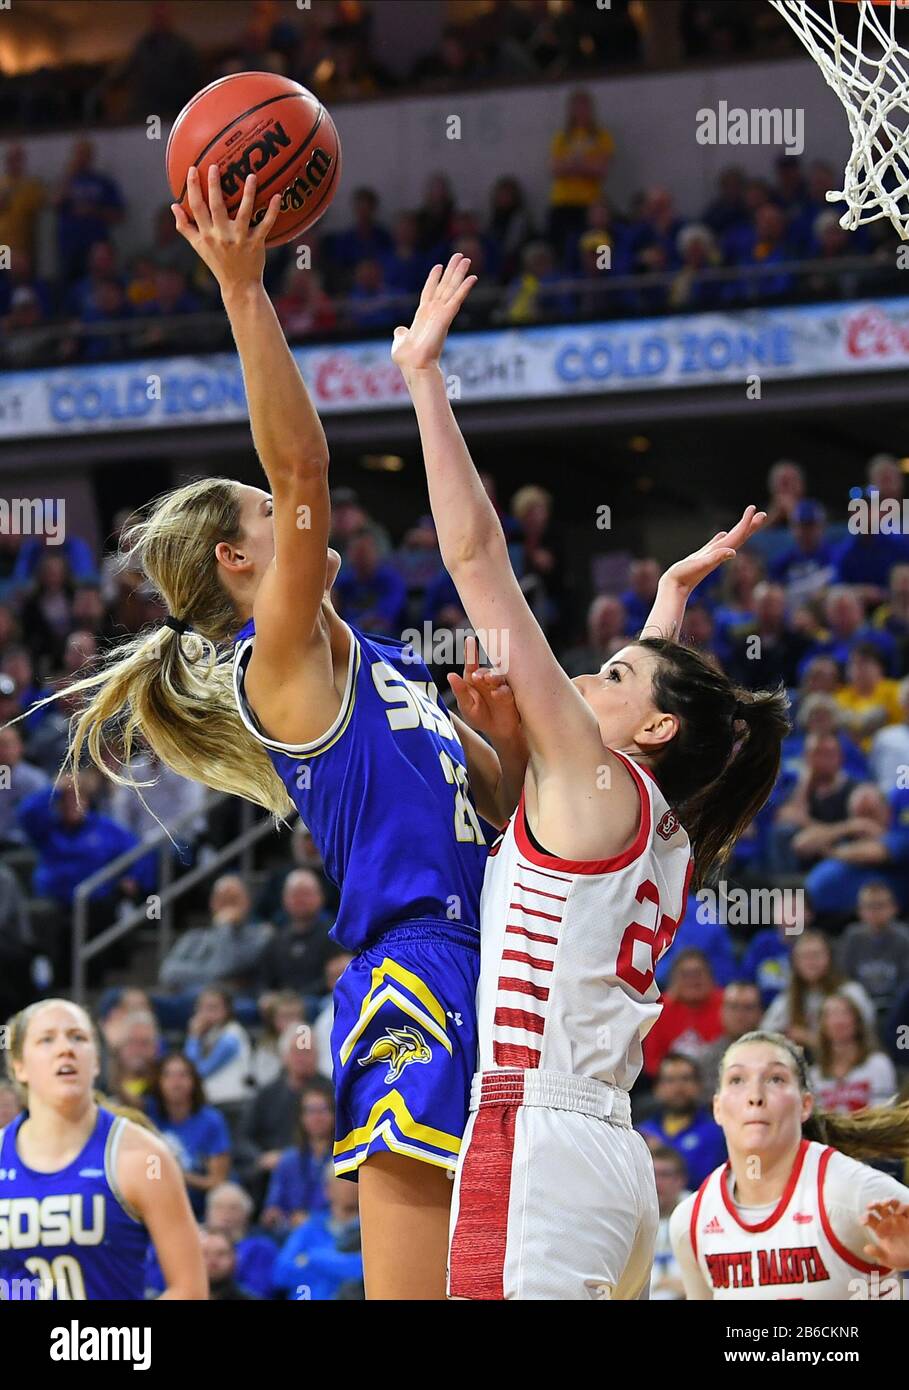 March 10, 2020: South Dakota State Jackrabbits guard Tylee Irwin (21) goes up for a shot over South Dakota Coyotes guard Ciara Duffy (24) during the Summit League women's championship basketball game between the South Dakota State Jackrabbits and the South Dakota Coyotes at the Denny Sanford Premier Center, Sioux Falls, SD. South Dakota defeated South Dakota State 63-58 and move on to the NCAA tournament. Photo by Russell Hons/CSM Stock Photo